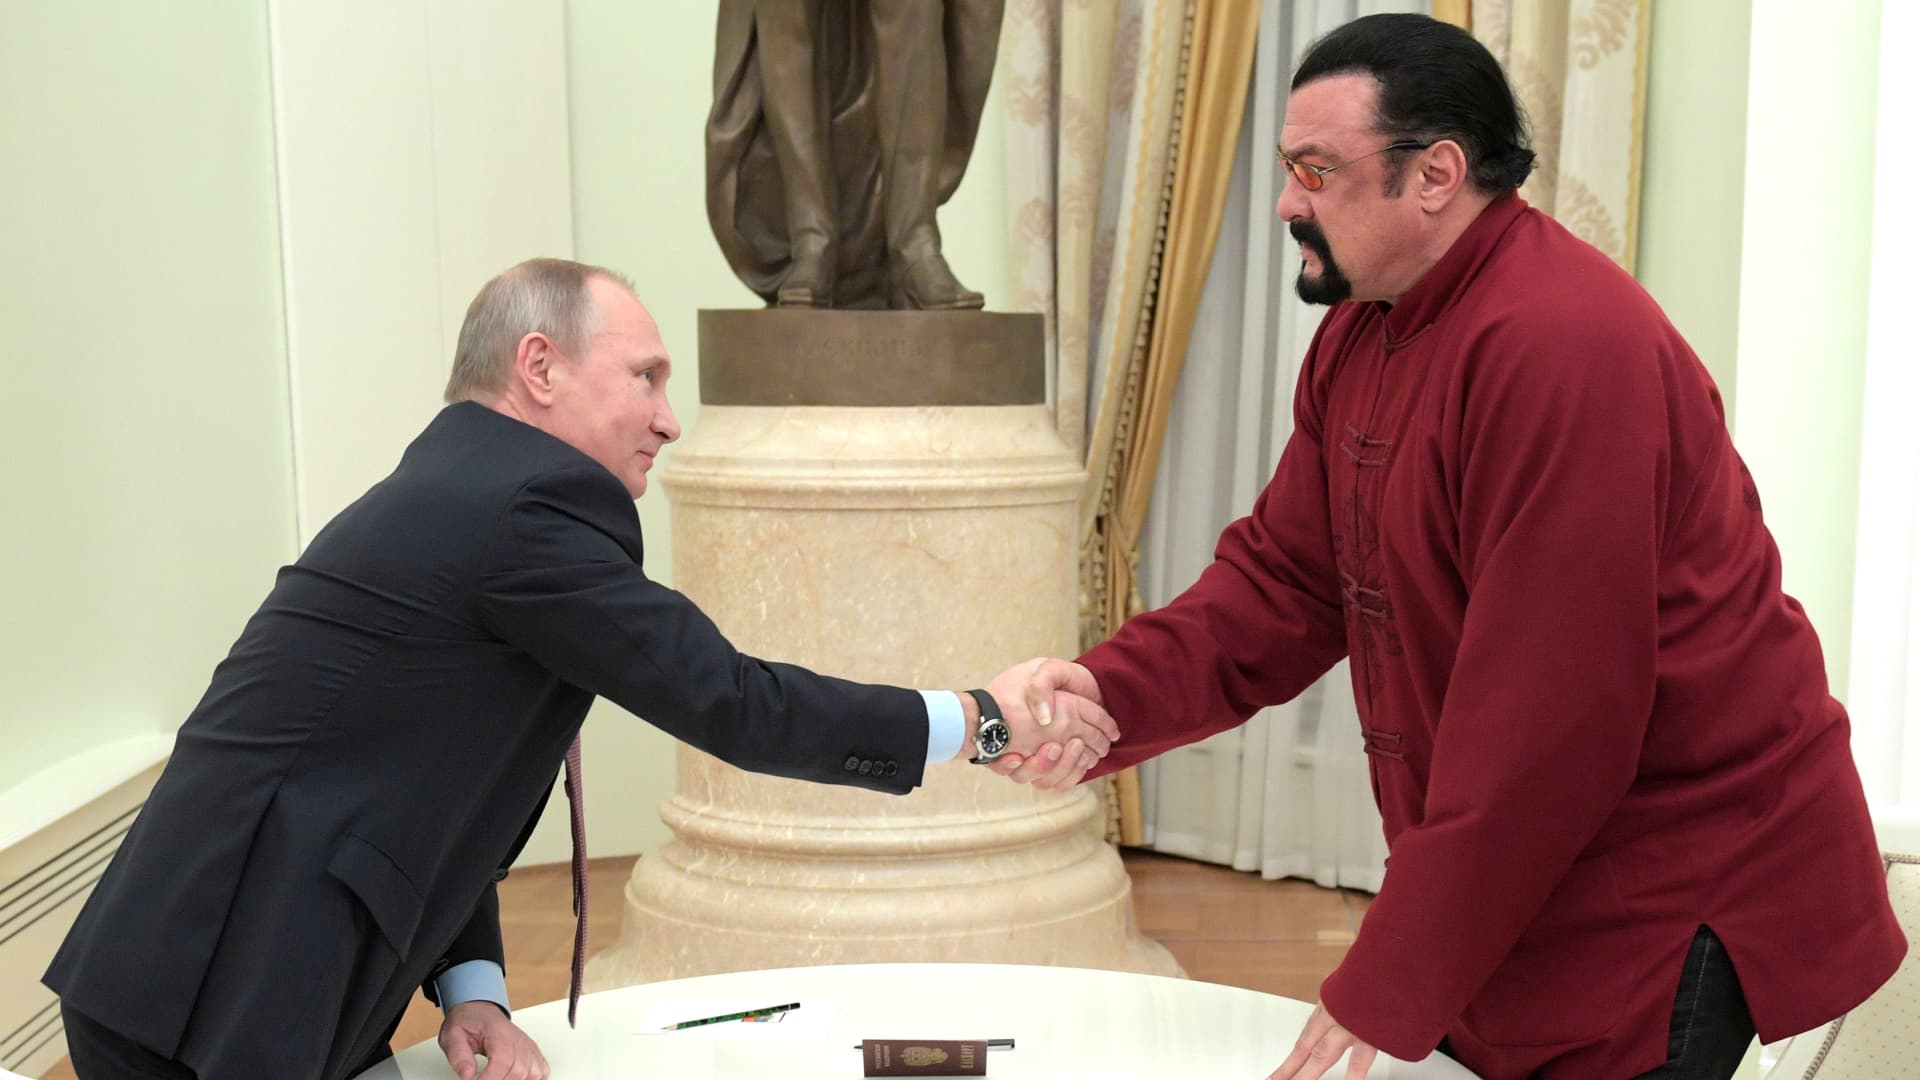 Russian President Vladimir Putin (L) shakes hands with US action hero actor Steven Seagal after presenting a Russian passport to him during a meeting at the Kremlin in Moscow on November 25, 2016.